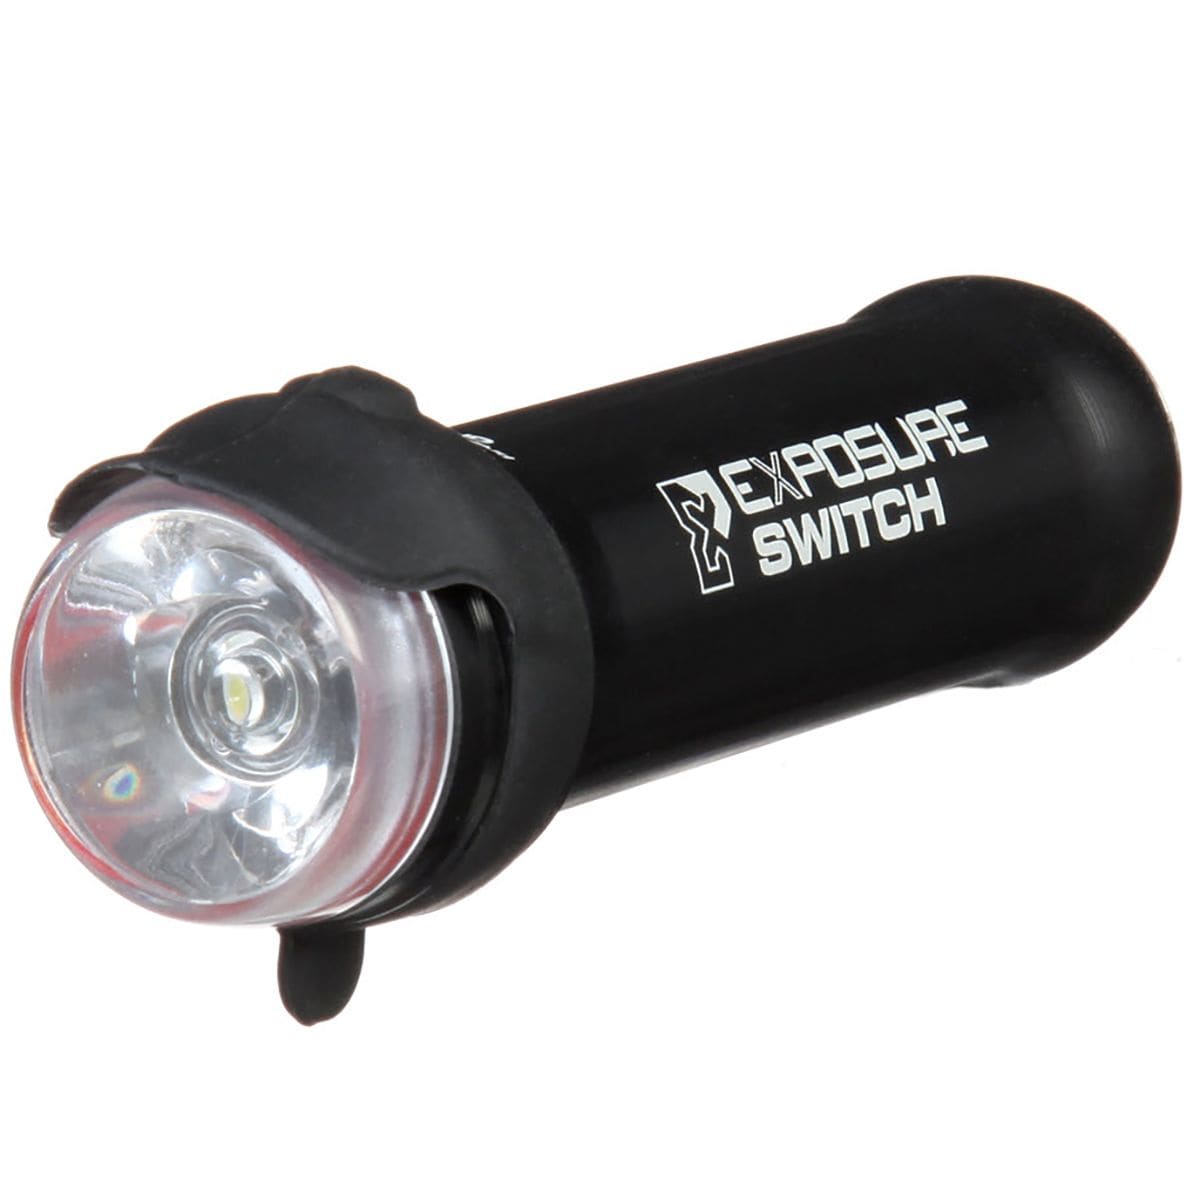 Exposure Switch Headlight with Flare Tail Light